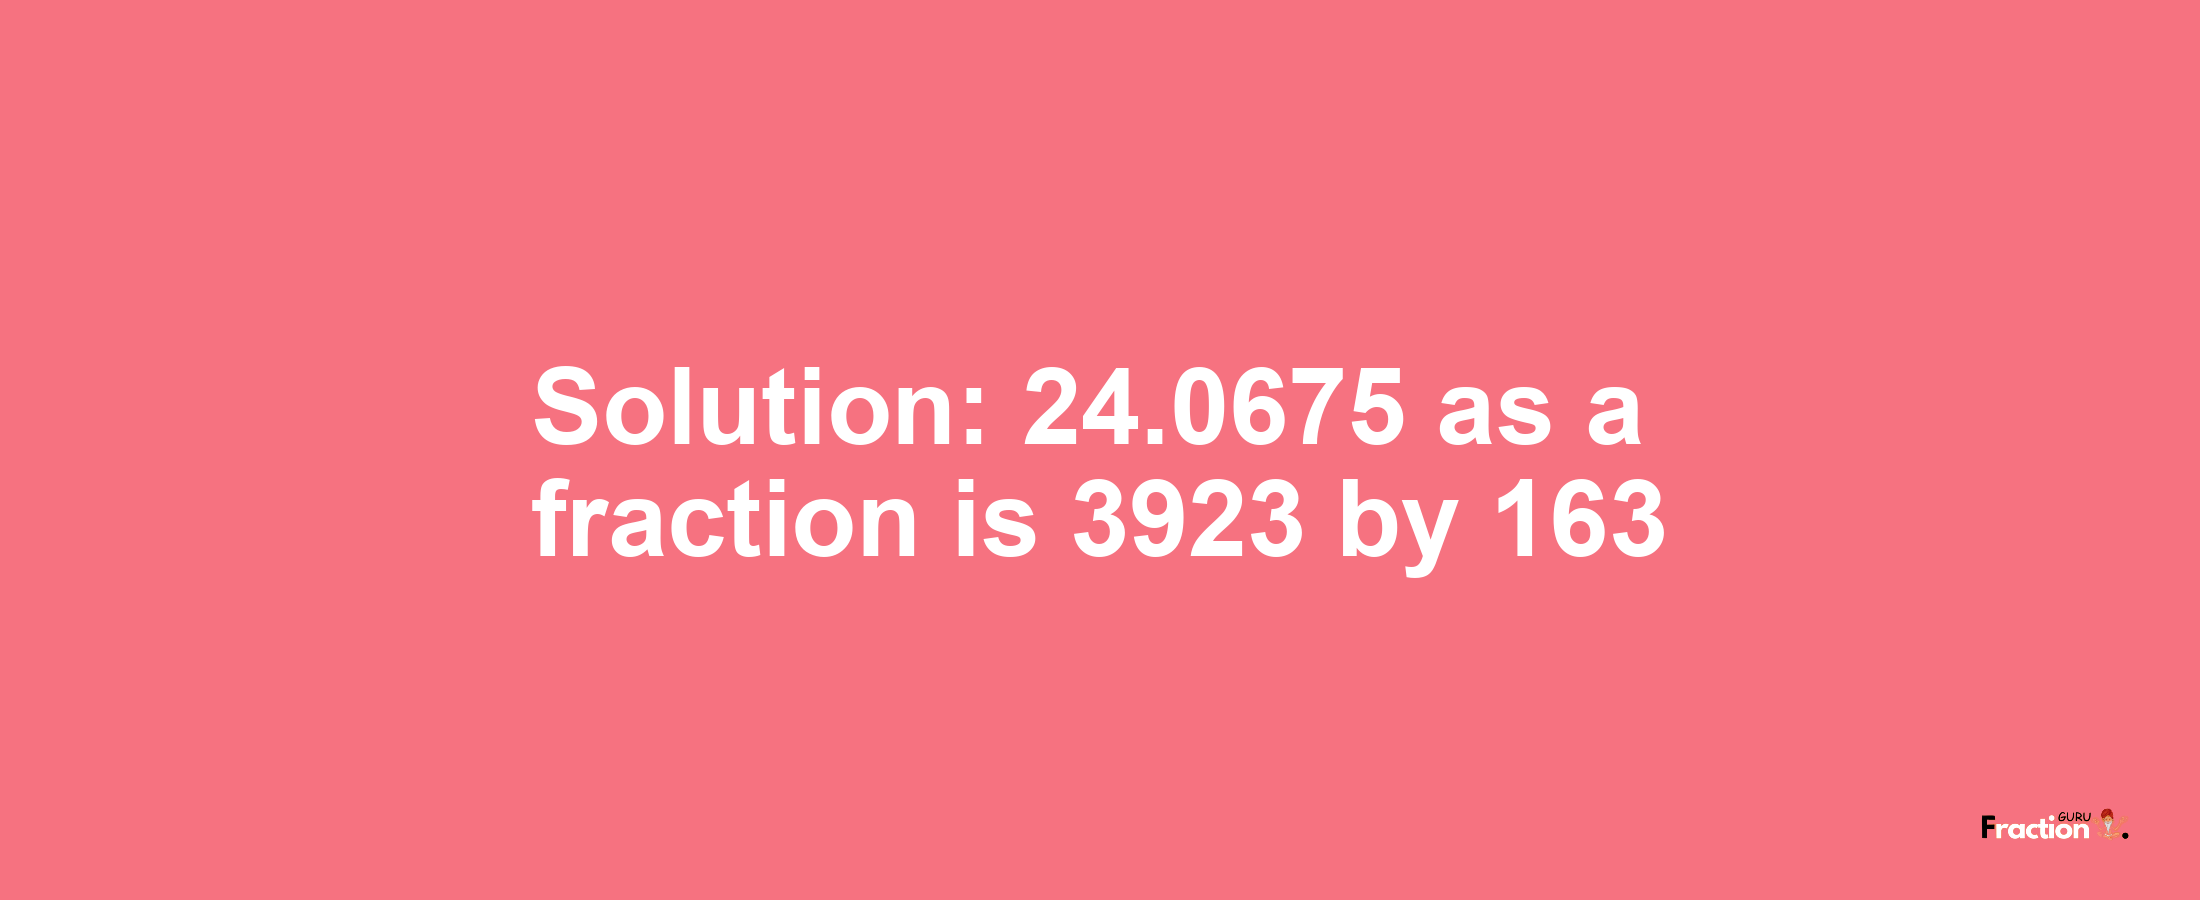 Solution:24.0675 as a fraction is 3923/163